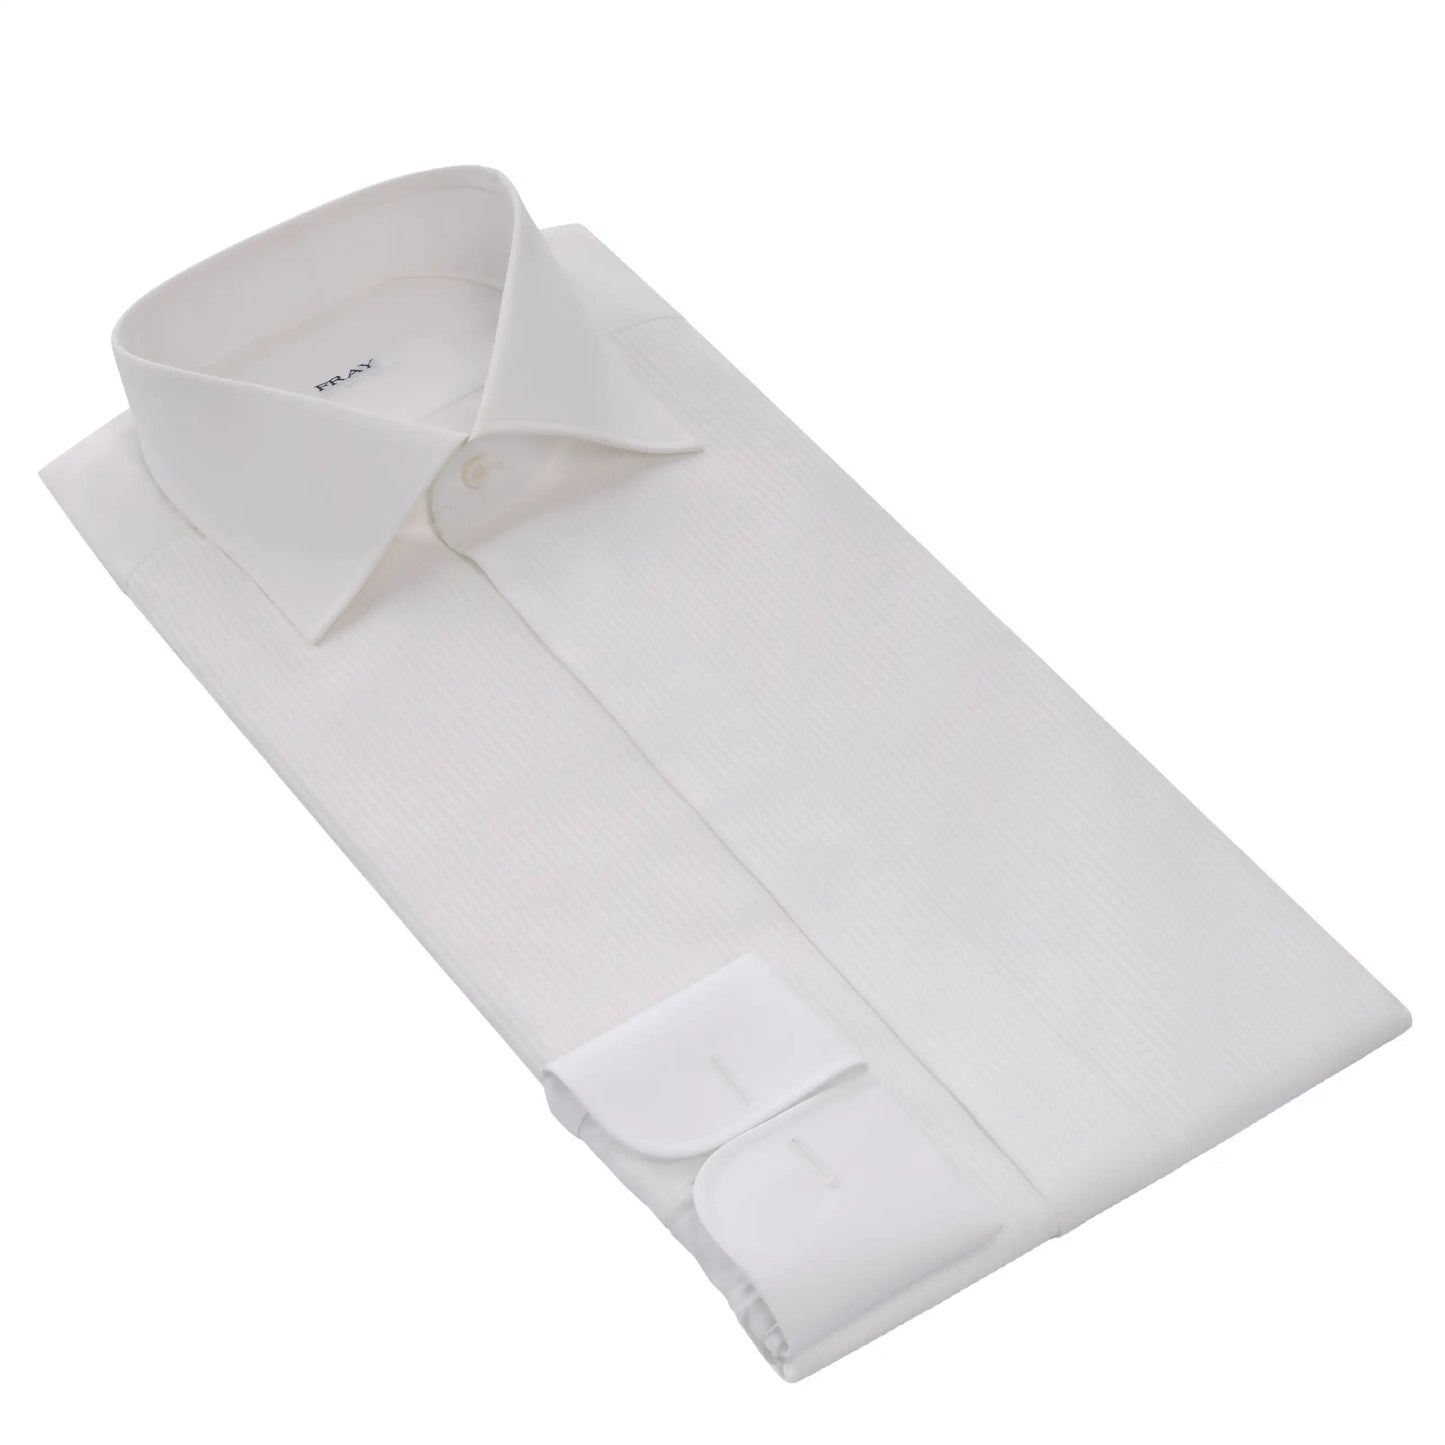 Fray Cotton Tailcoat Shirt in White - SARTALE